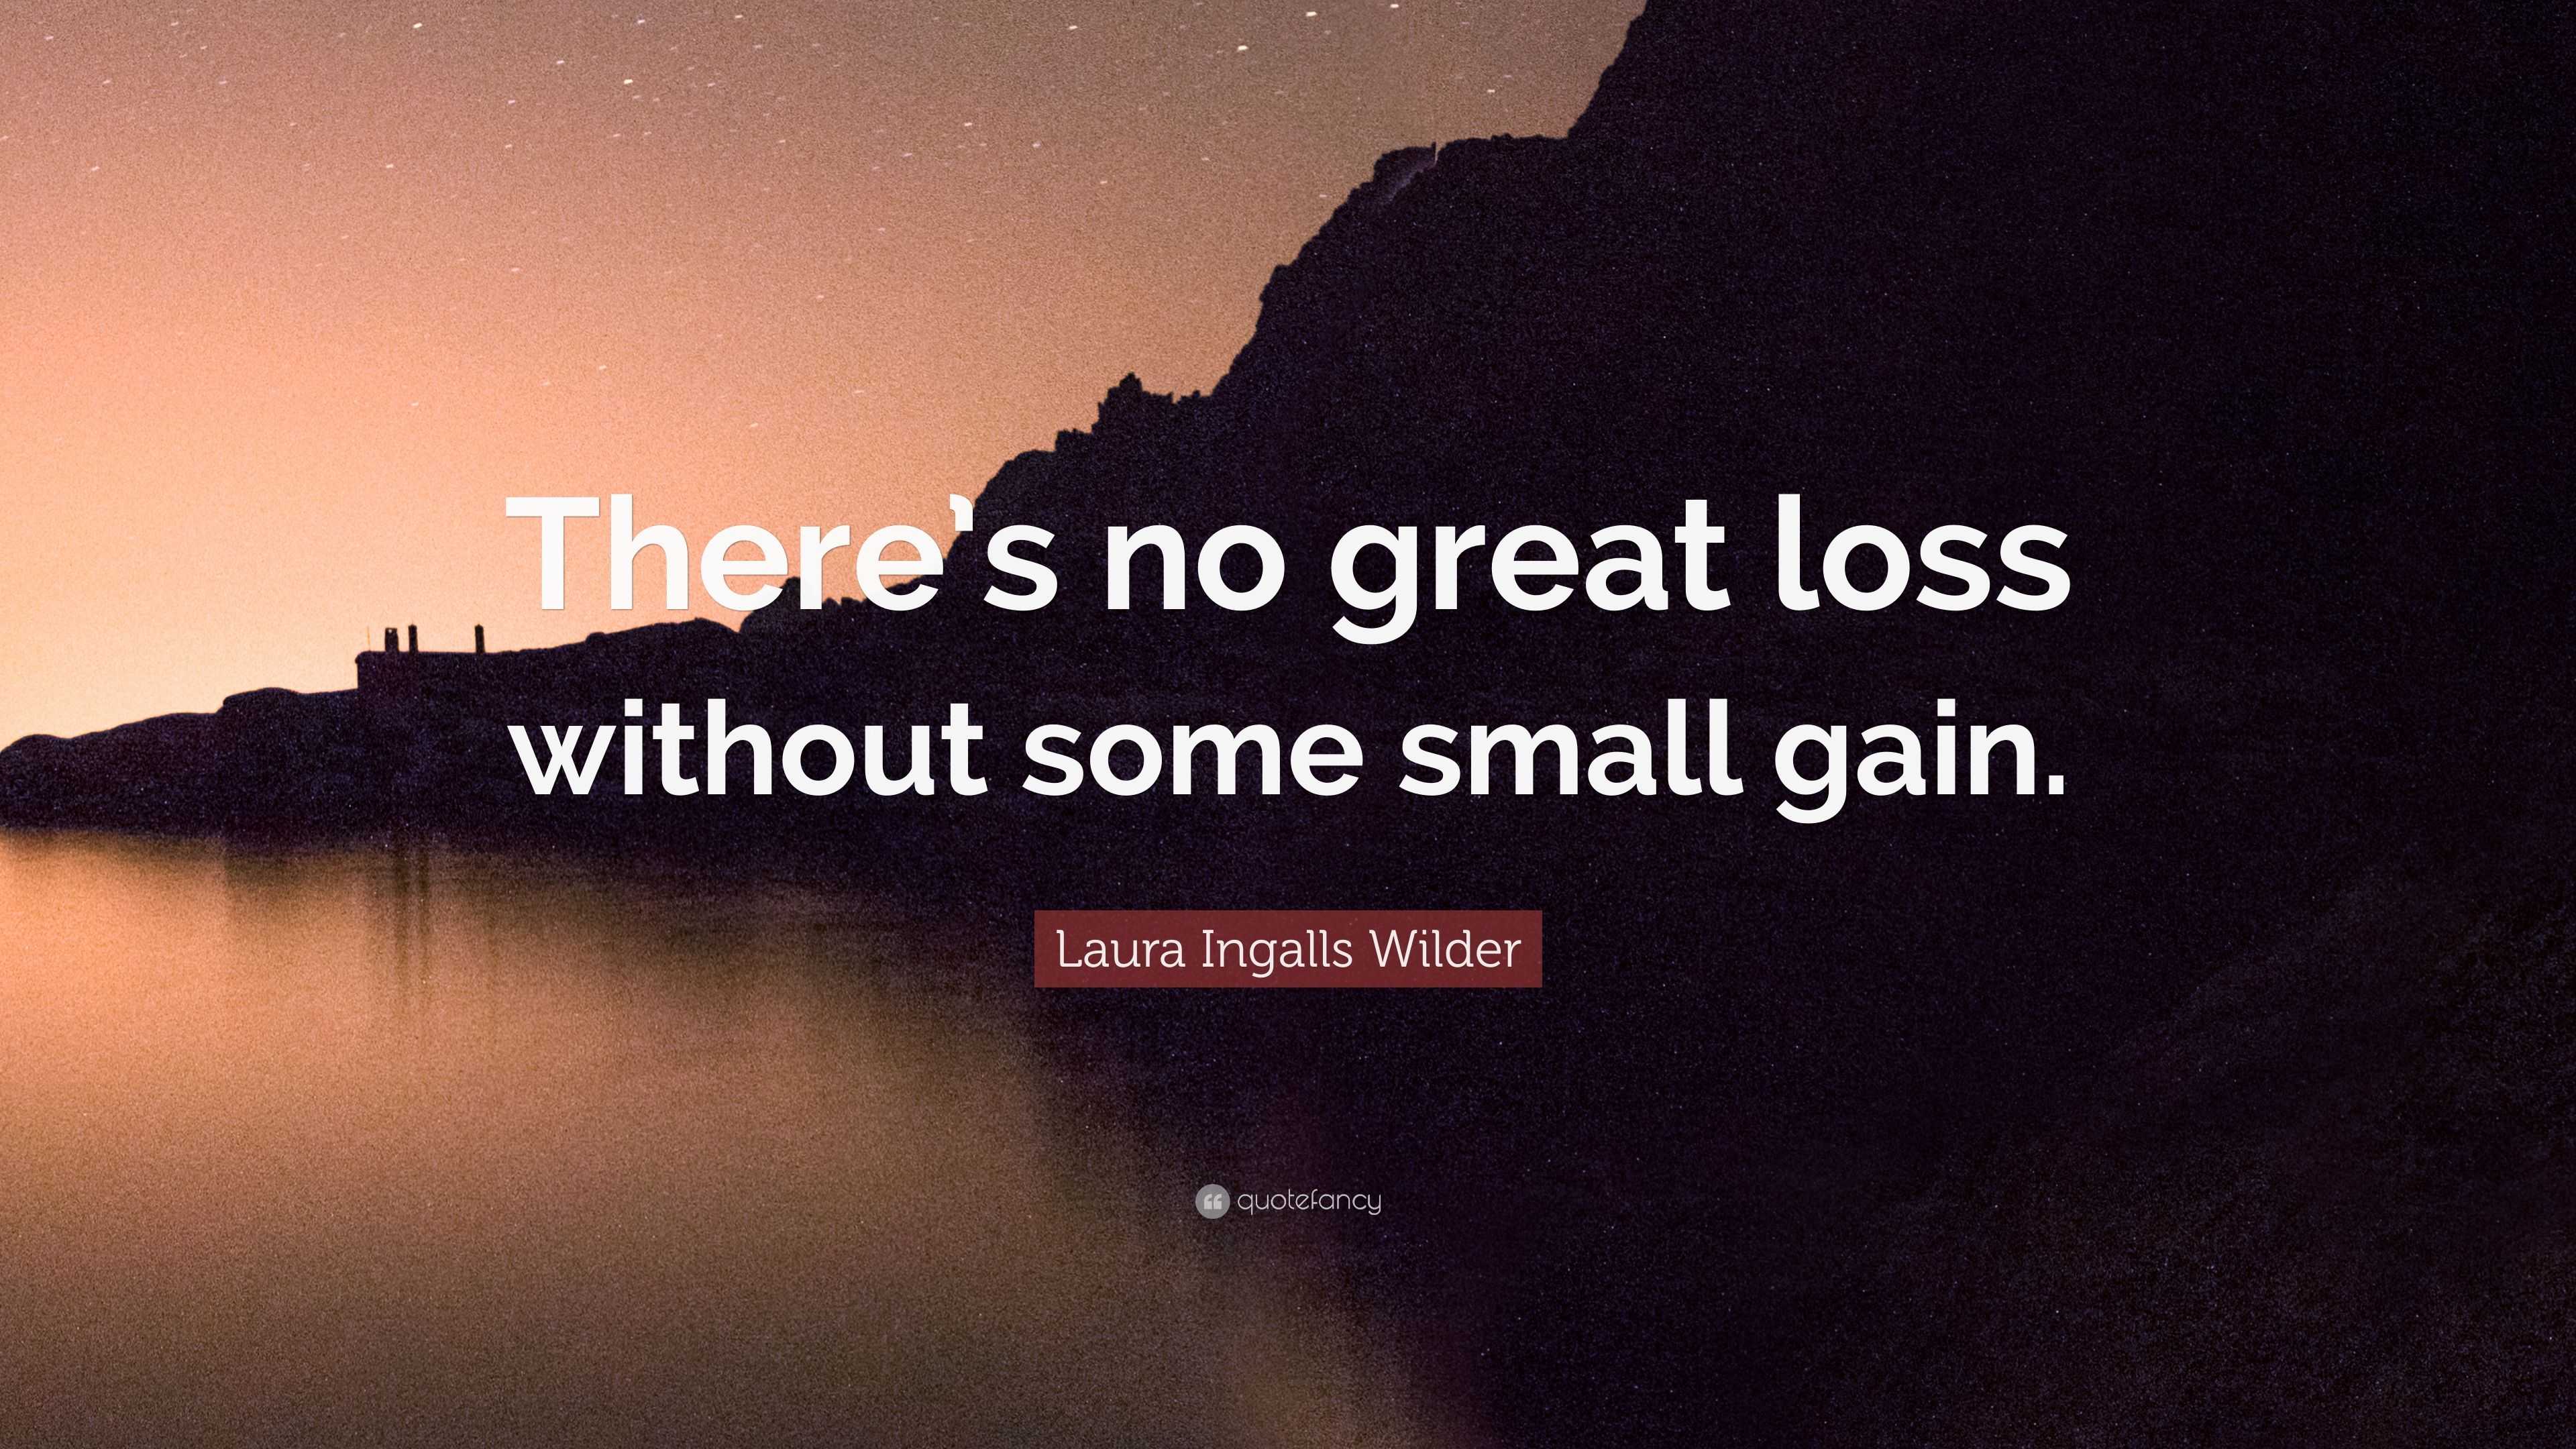 Laura Ingalls Wilder Quote: “There's no great loss without some small gain.”